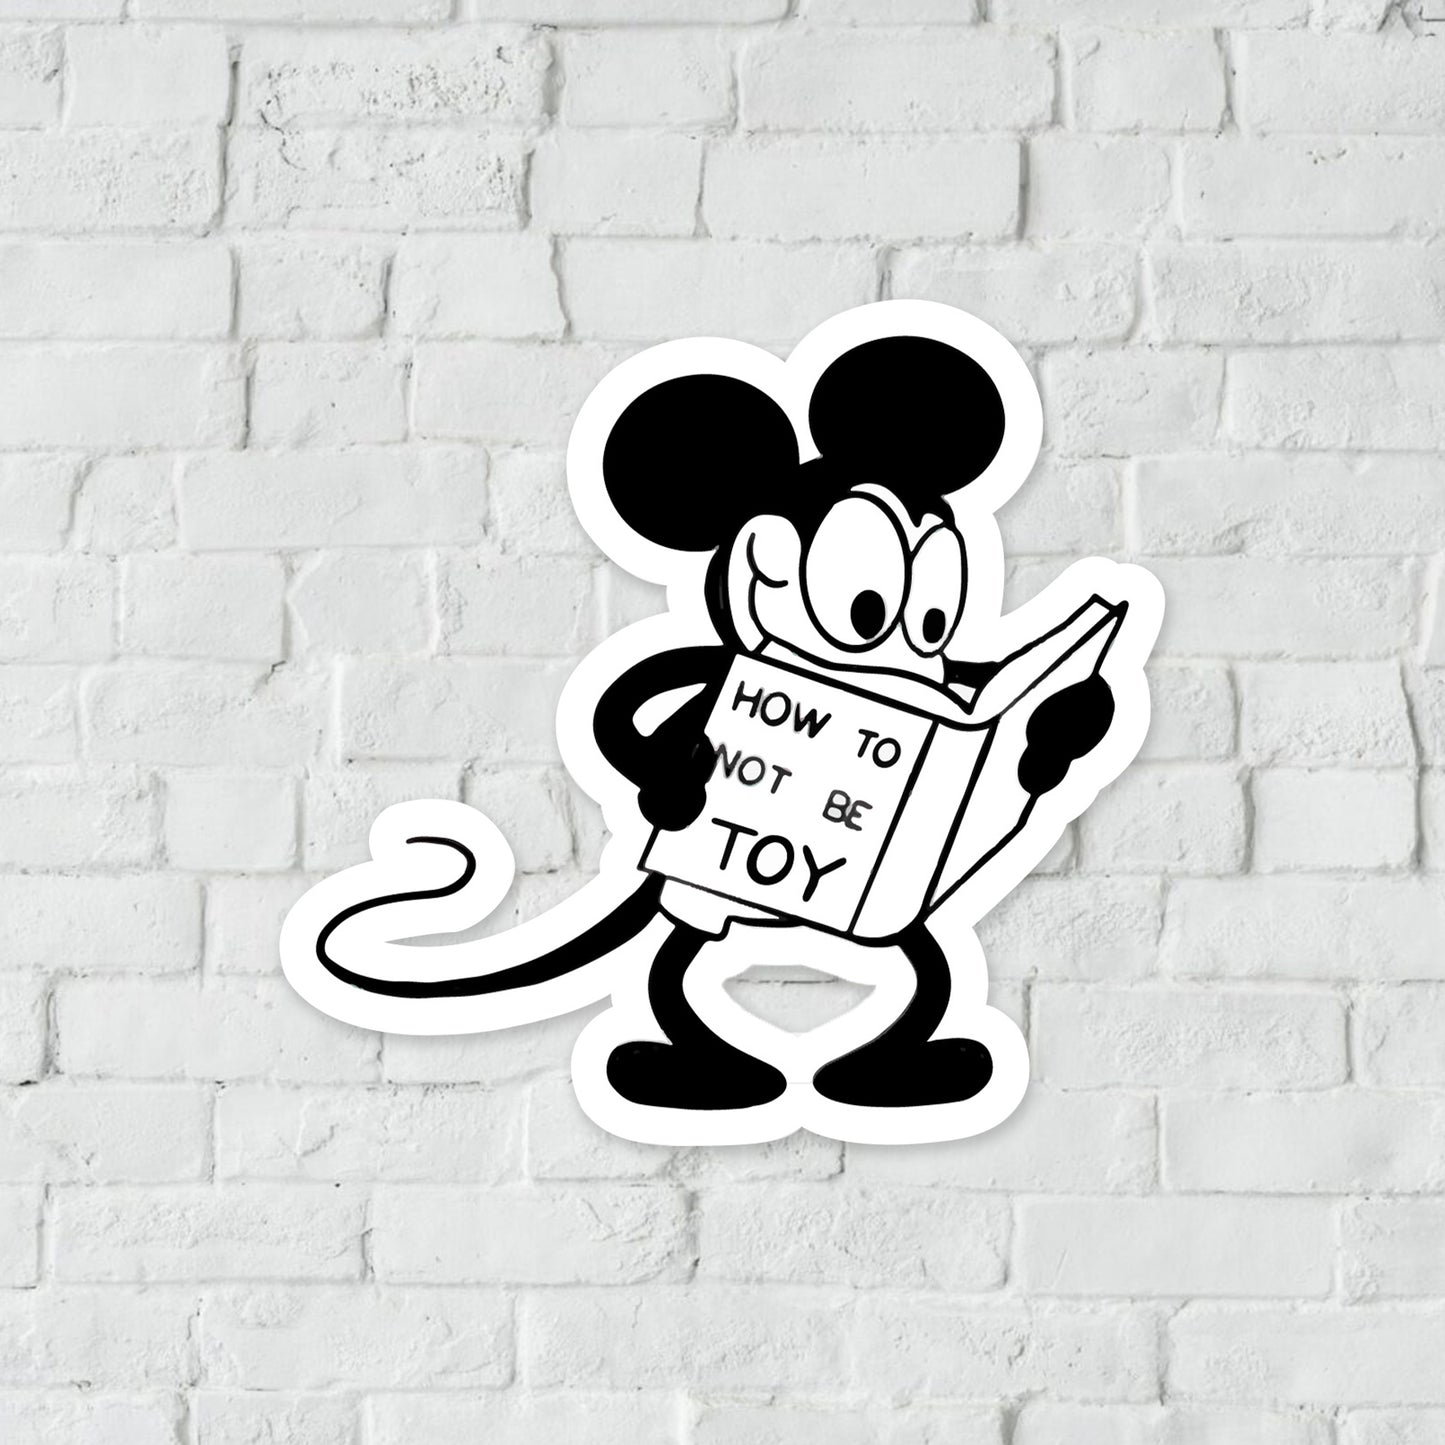 Decorative sticker decal of mickey mouse